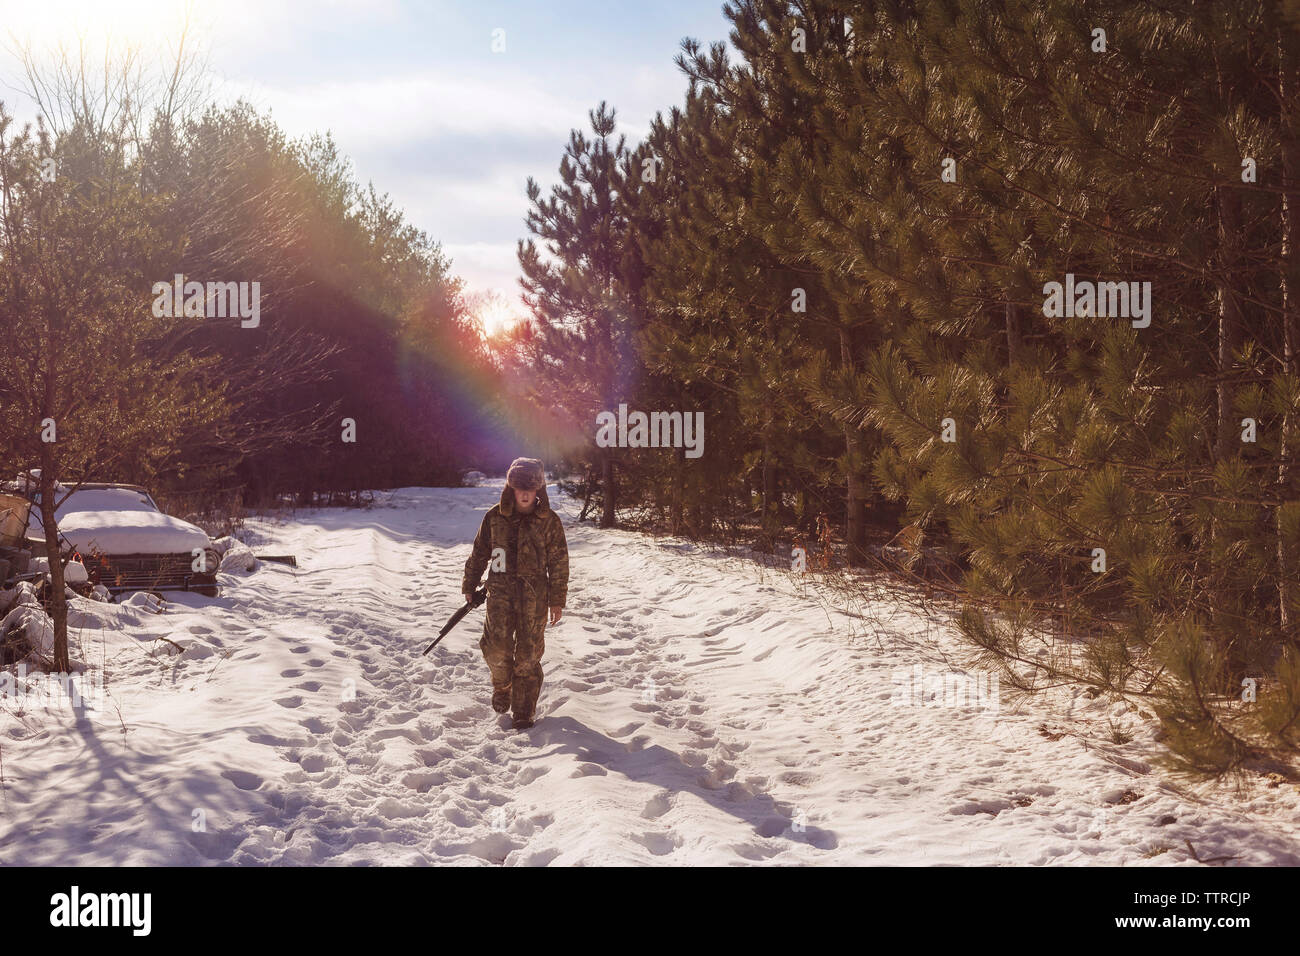 Full length of boy holding gun walking on snow covered field amidst trees Stock Photo